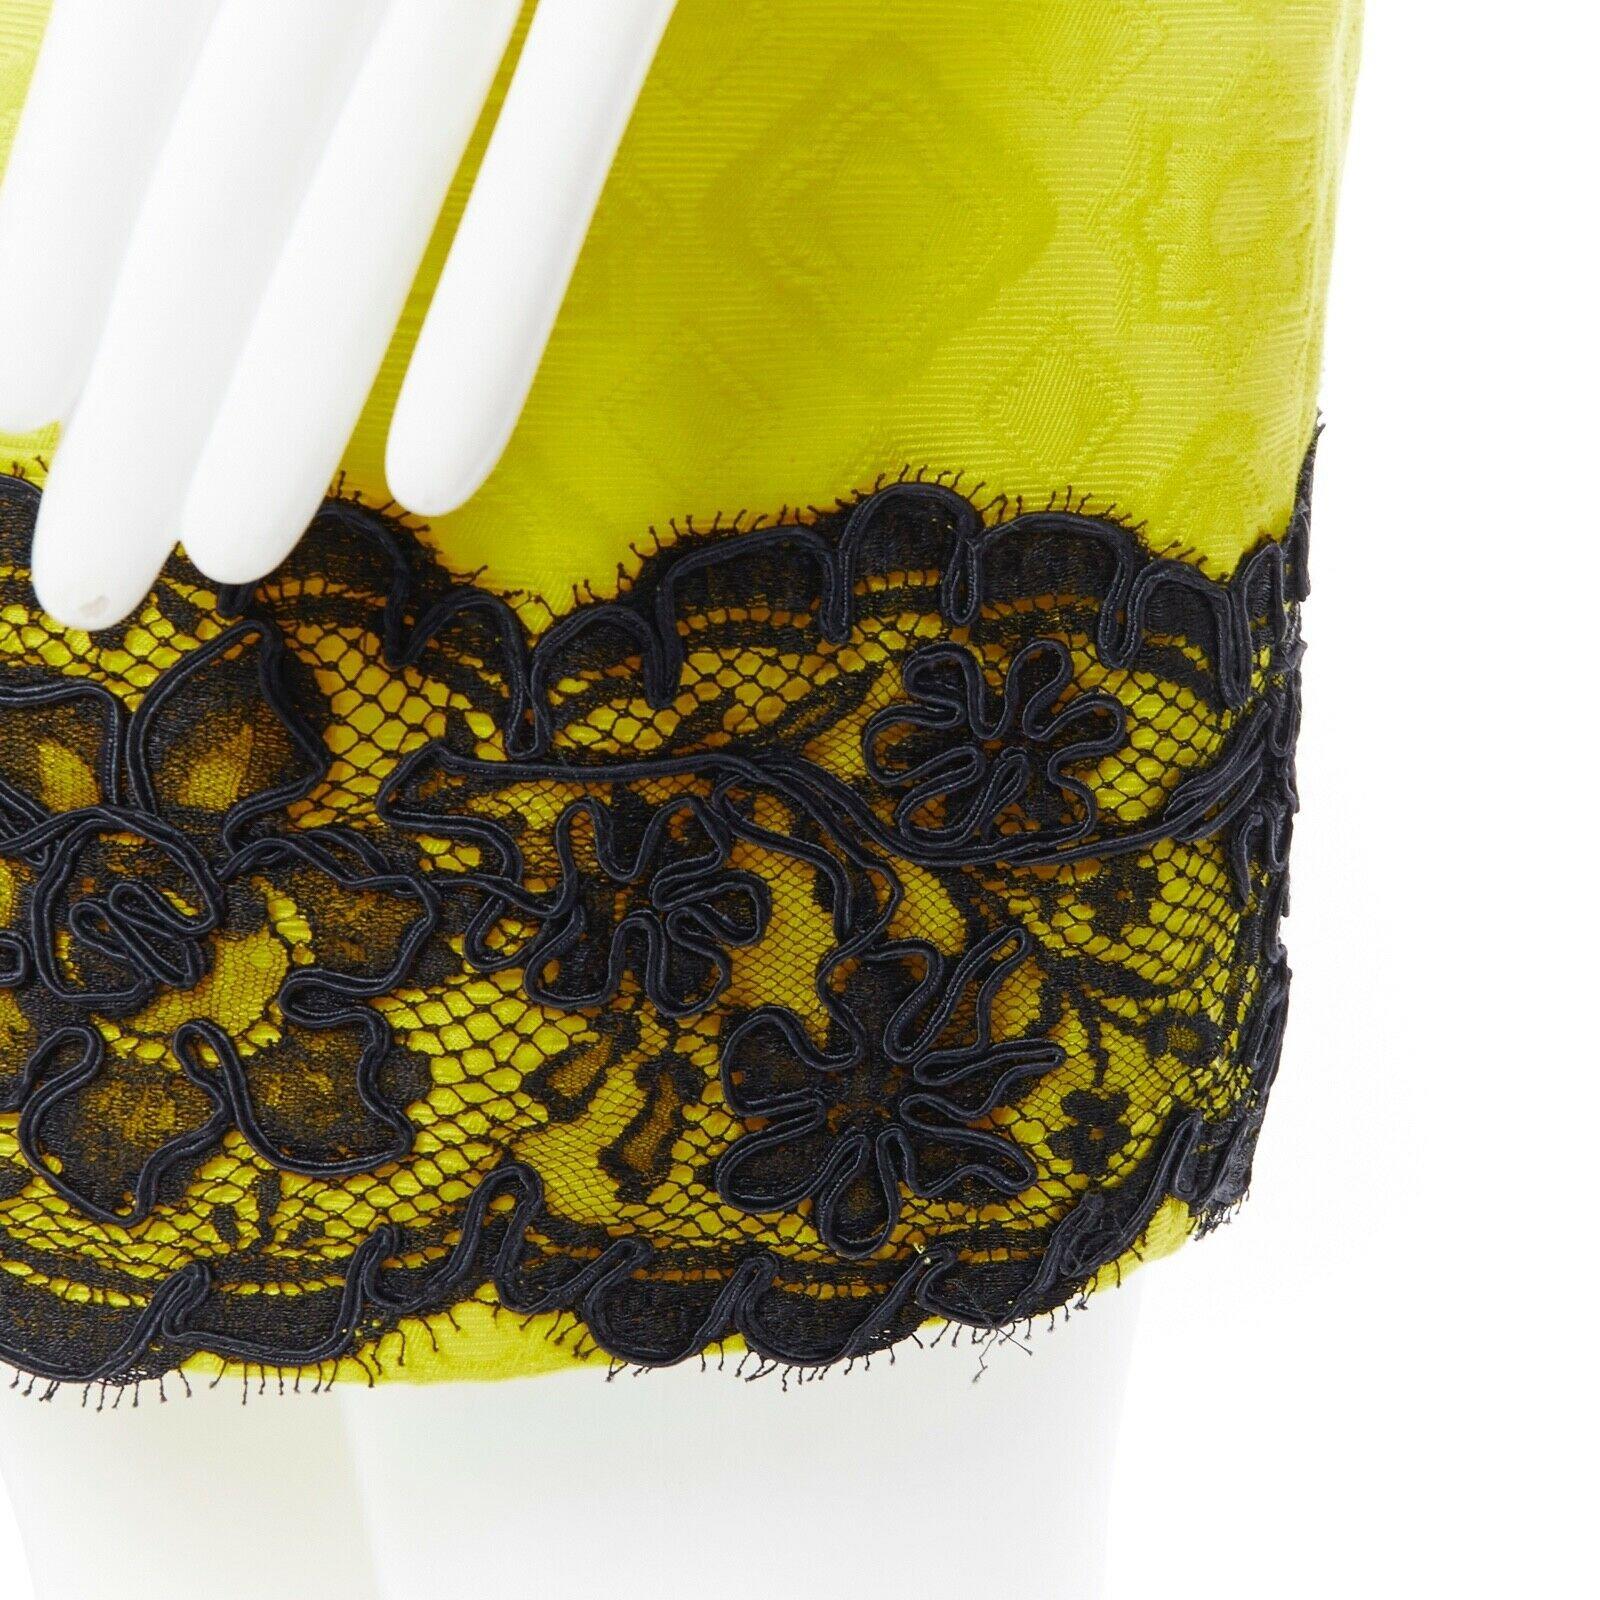 CHRISTIAN LACROIX yellow cotton floral jacquard black lace pencil skirt FR40
Brand: Christian Lacroix
Material: Cotton
Color: Yellow
Pattern: Floral
Closure: Zip
Extra Detail: Bright canary yellow jacquard. Pencil skirt. Black lace trimming near the